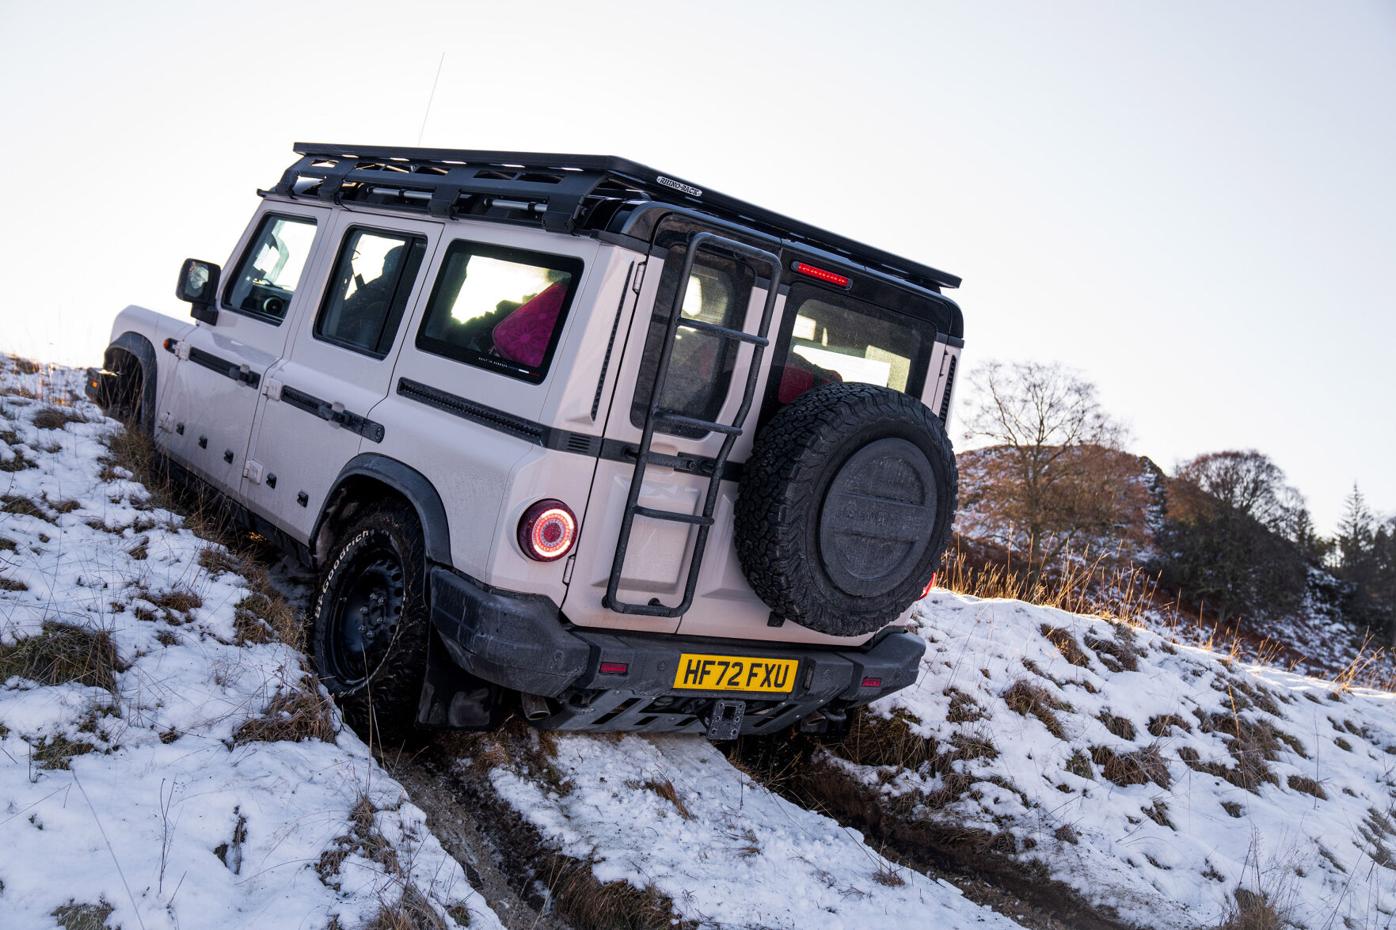 Auto review: Ineos Grenadier is an old-school SUV for a digital